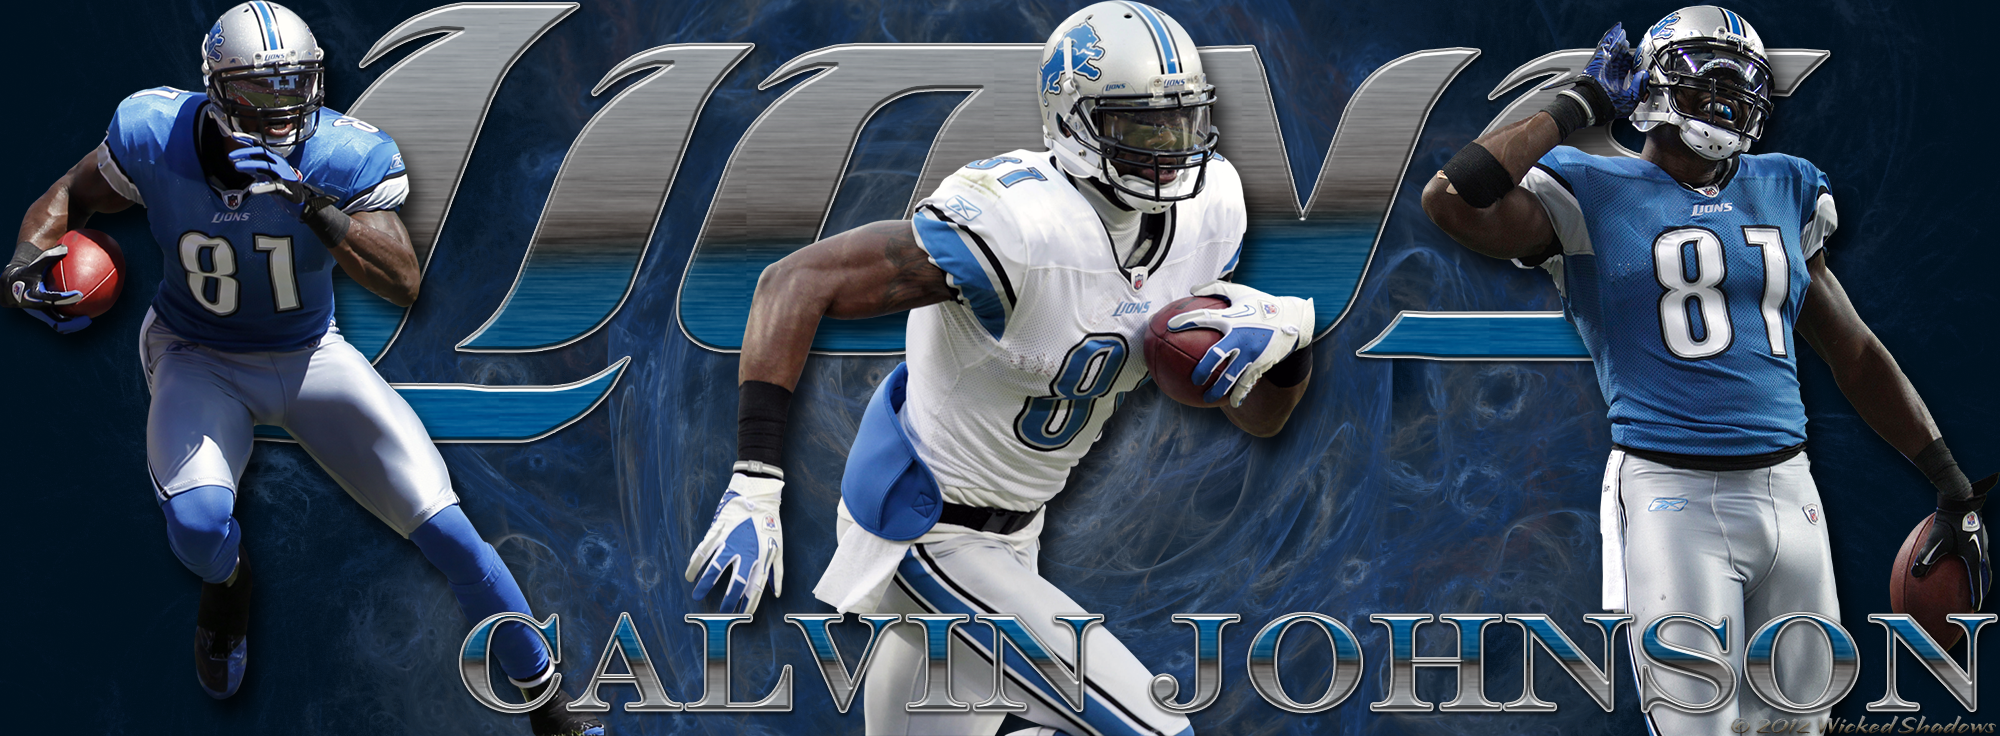 Wallpaper By Wicked Shadows Detroit Lions Nfl